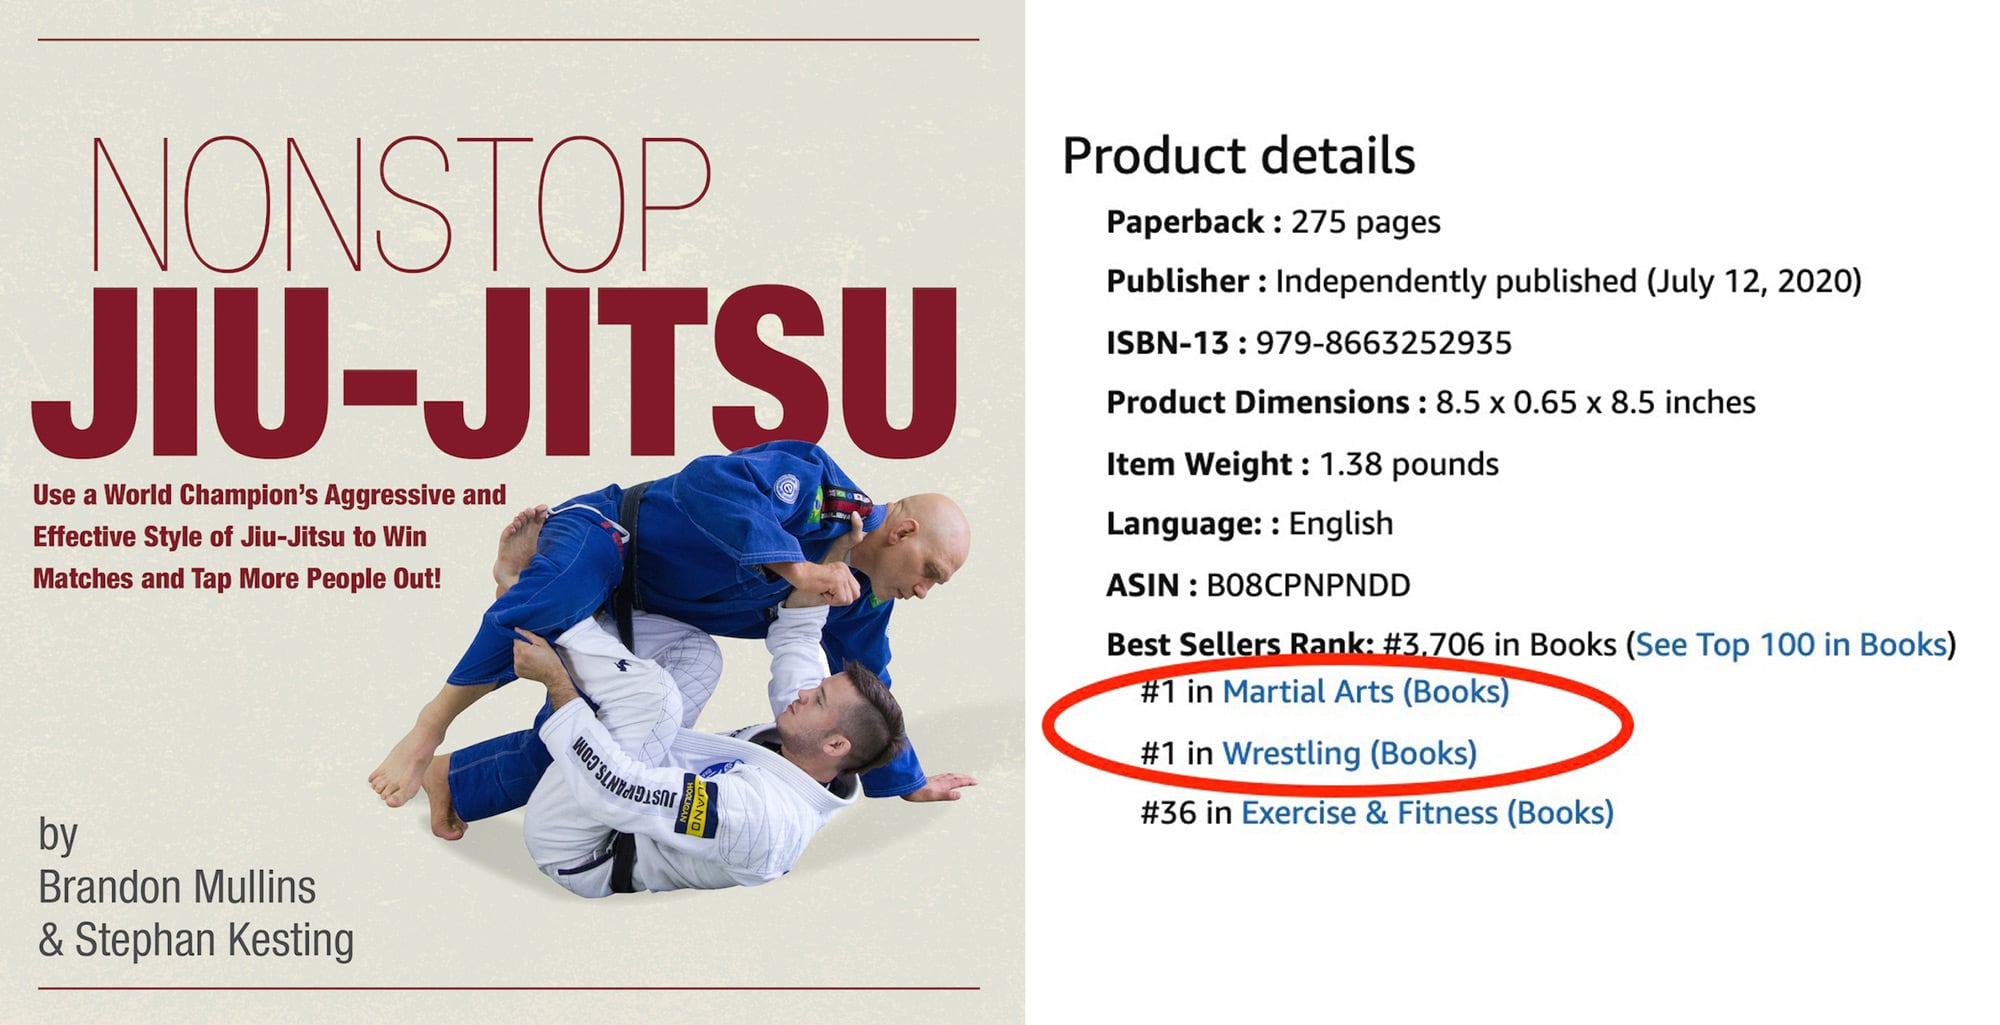 Nonstop Jiu-Jitsu is now the number one martial arts book on Amazon